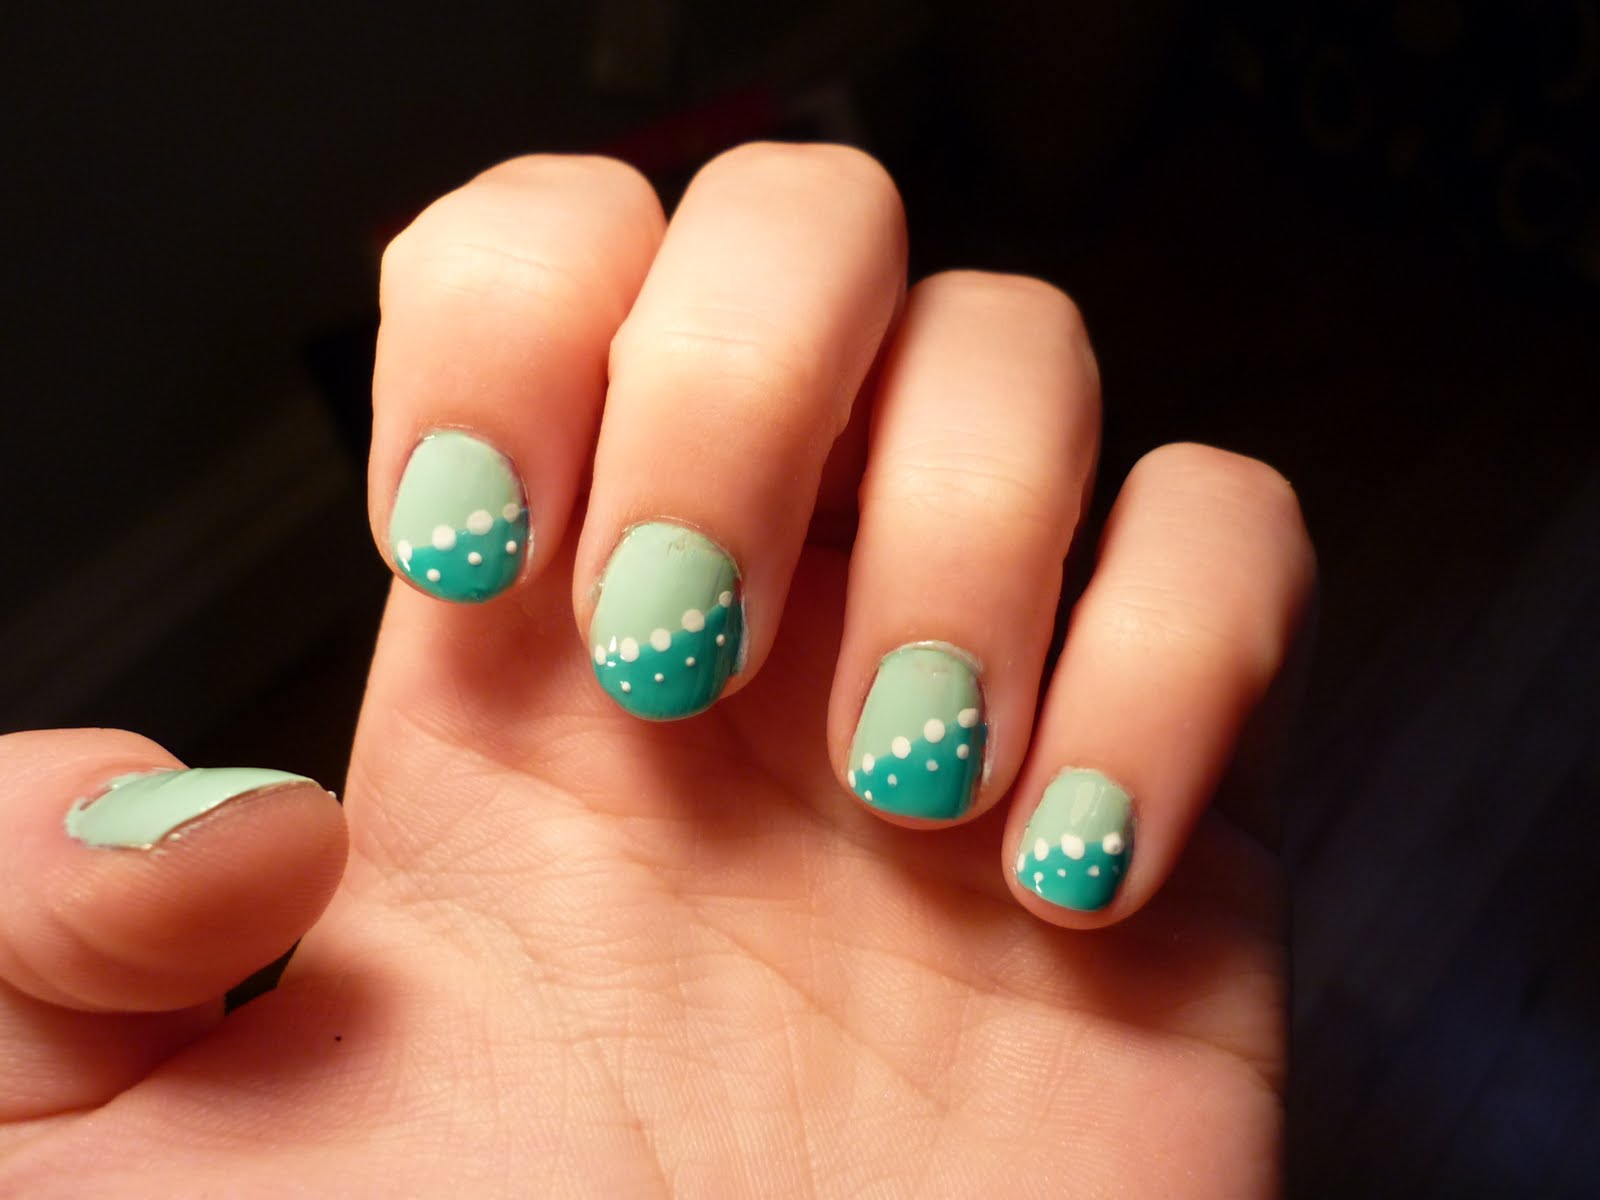 Cute nail design with tape - wide 3